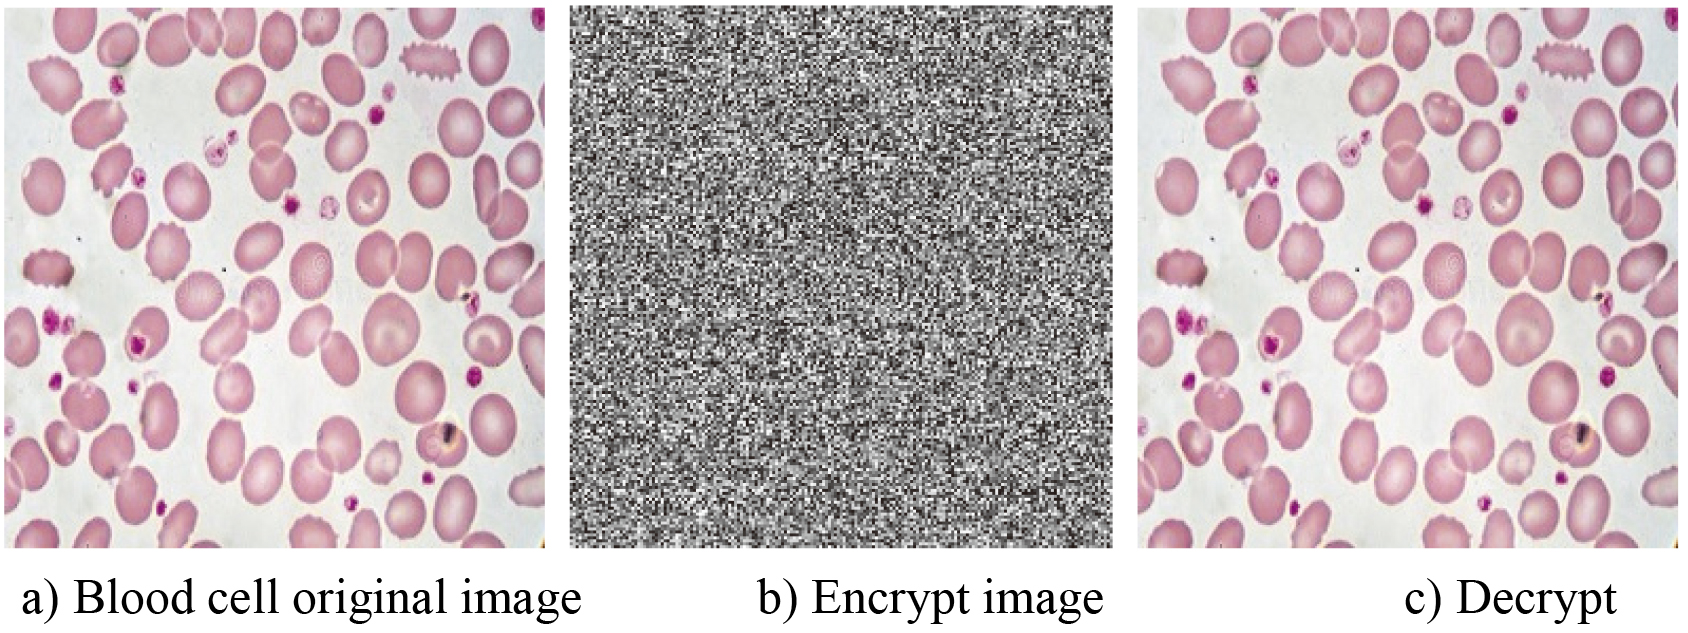 Encryption effect of blood cell image.